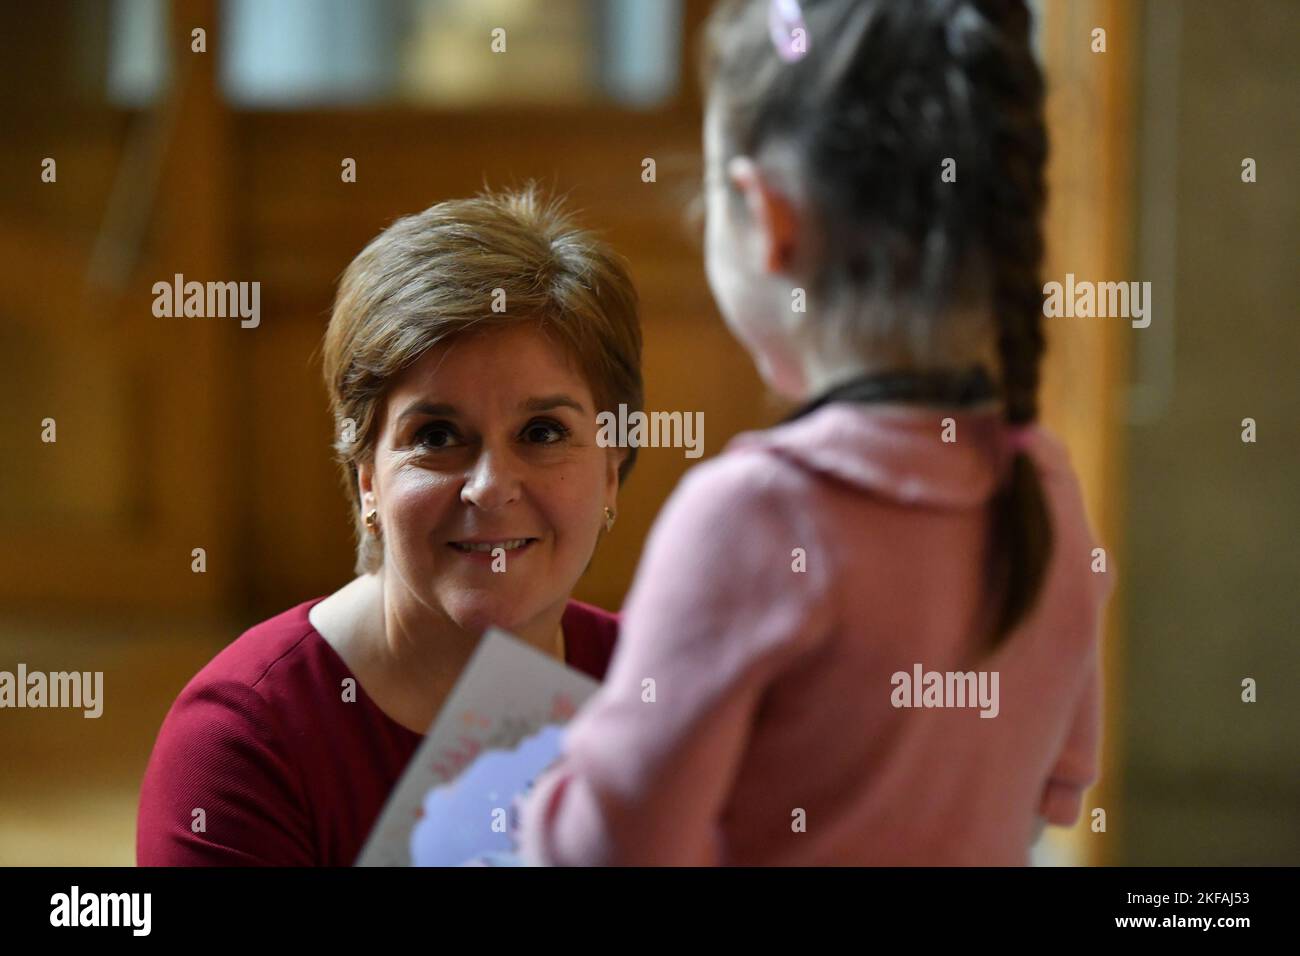 Edinburgh, Scotland, UK. 17 November 2022. PICTURED: Ava, 6, who is celebrating her 6th birthday today seen meeting seen meeting Nicola Sturgeon MSP, First Minister of Scotland and Leader of the Scottish National Party (SNP). Ava wanted to come and meet the First Minister again after she last saw the First Minister during the council elections in Kirkcaldy spending the afternoon with her during campaigning. Scenes inside the weekly session of First Ministers Questions inside the Scottish Parliament at Holyrood. Scenes showing before, during and after FMQs. Credit: Colin D Fisher Stock Photo